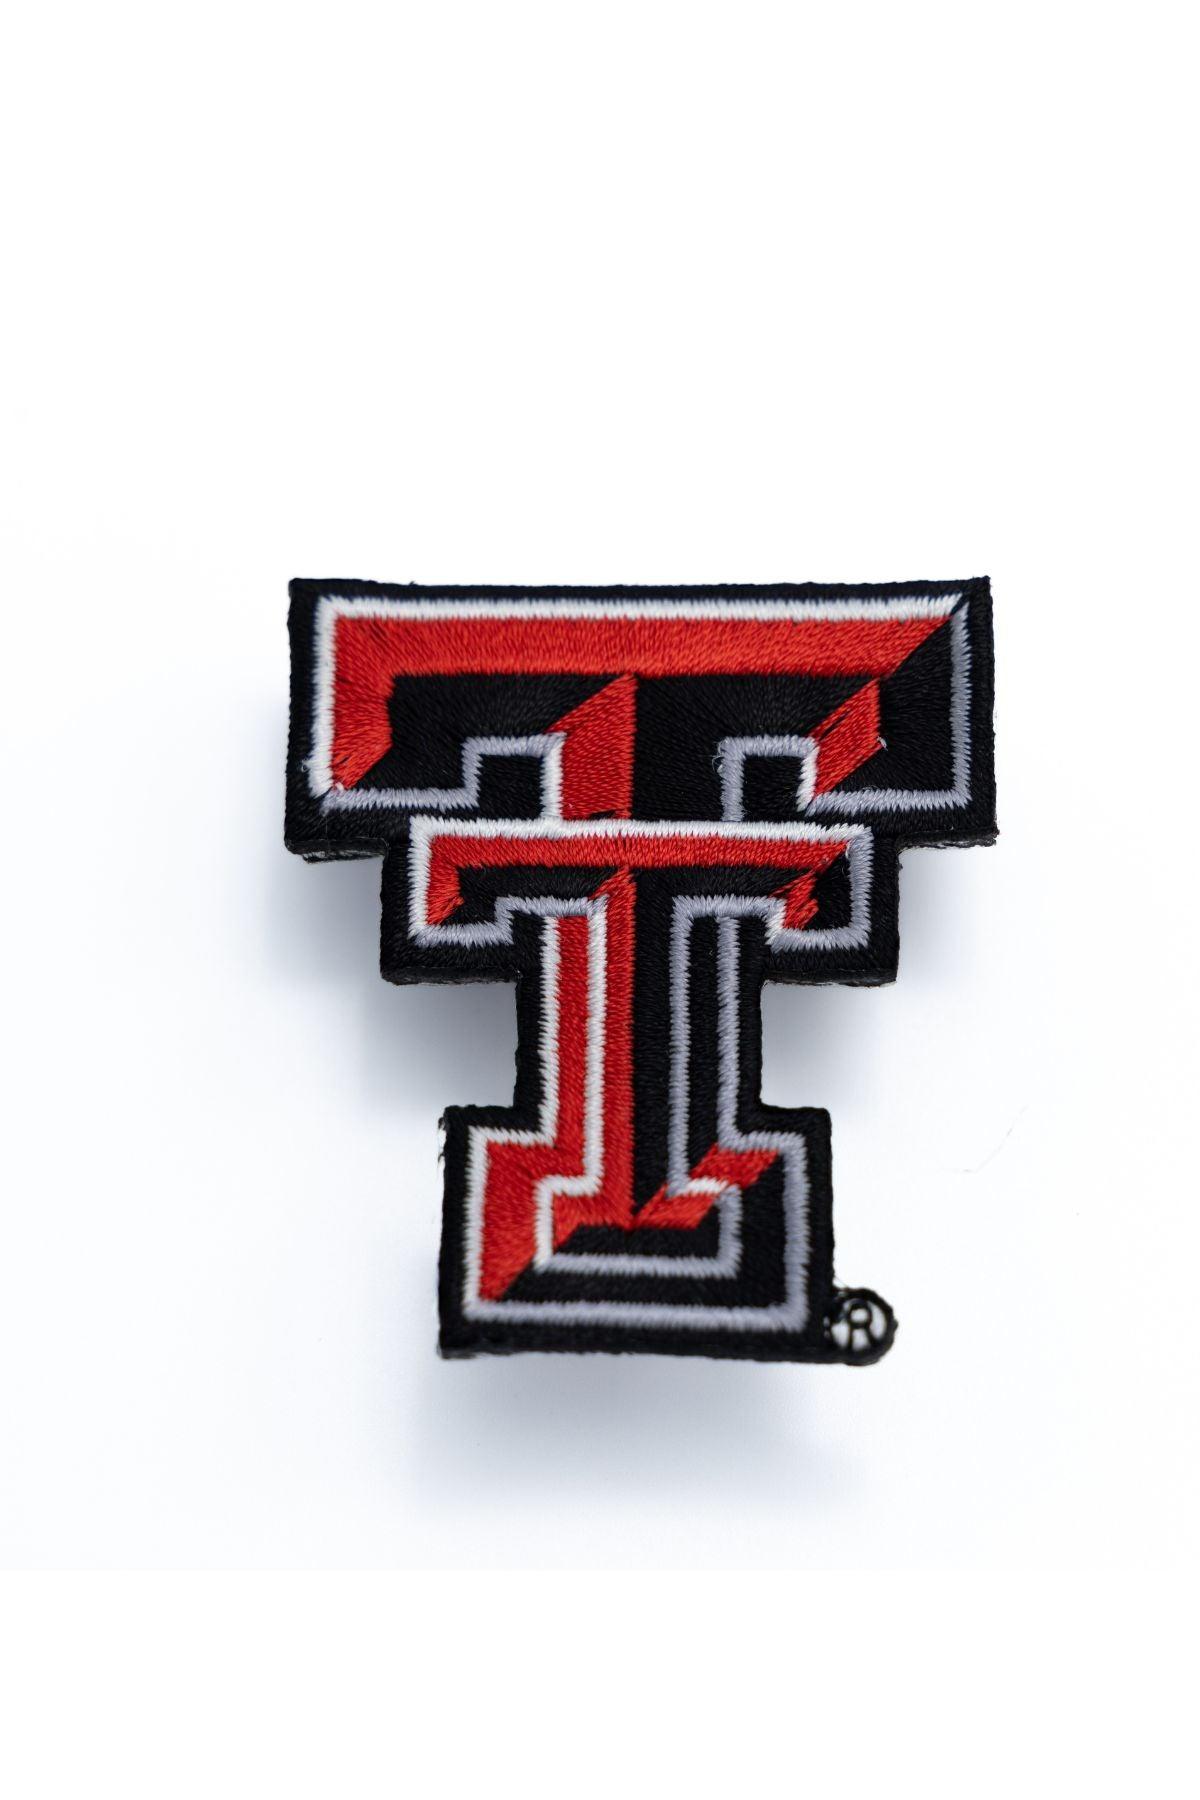 TEXAS TECH EMBROIDERED PATCH - Cowboy Snapback